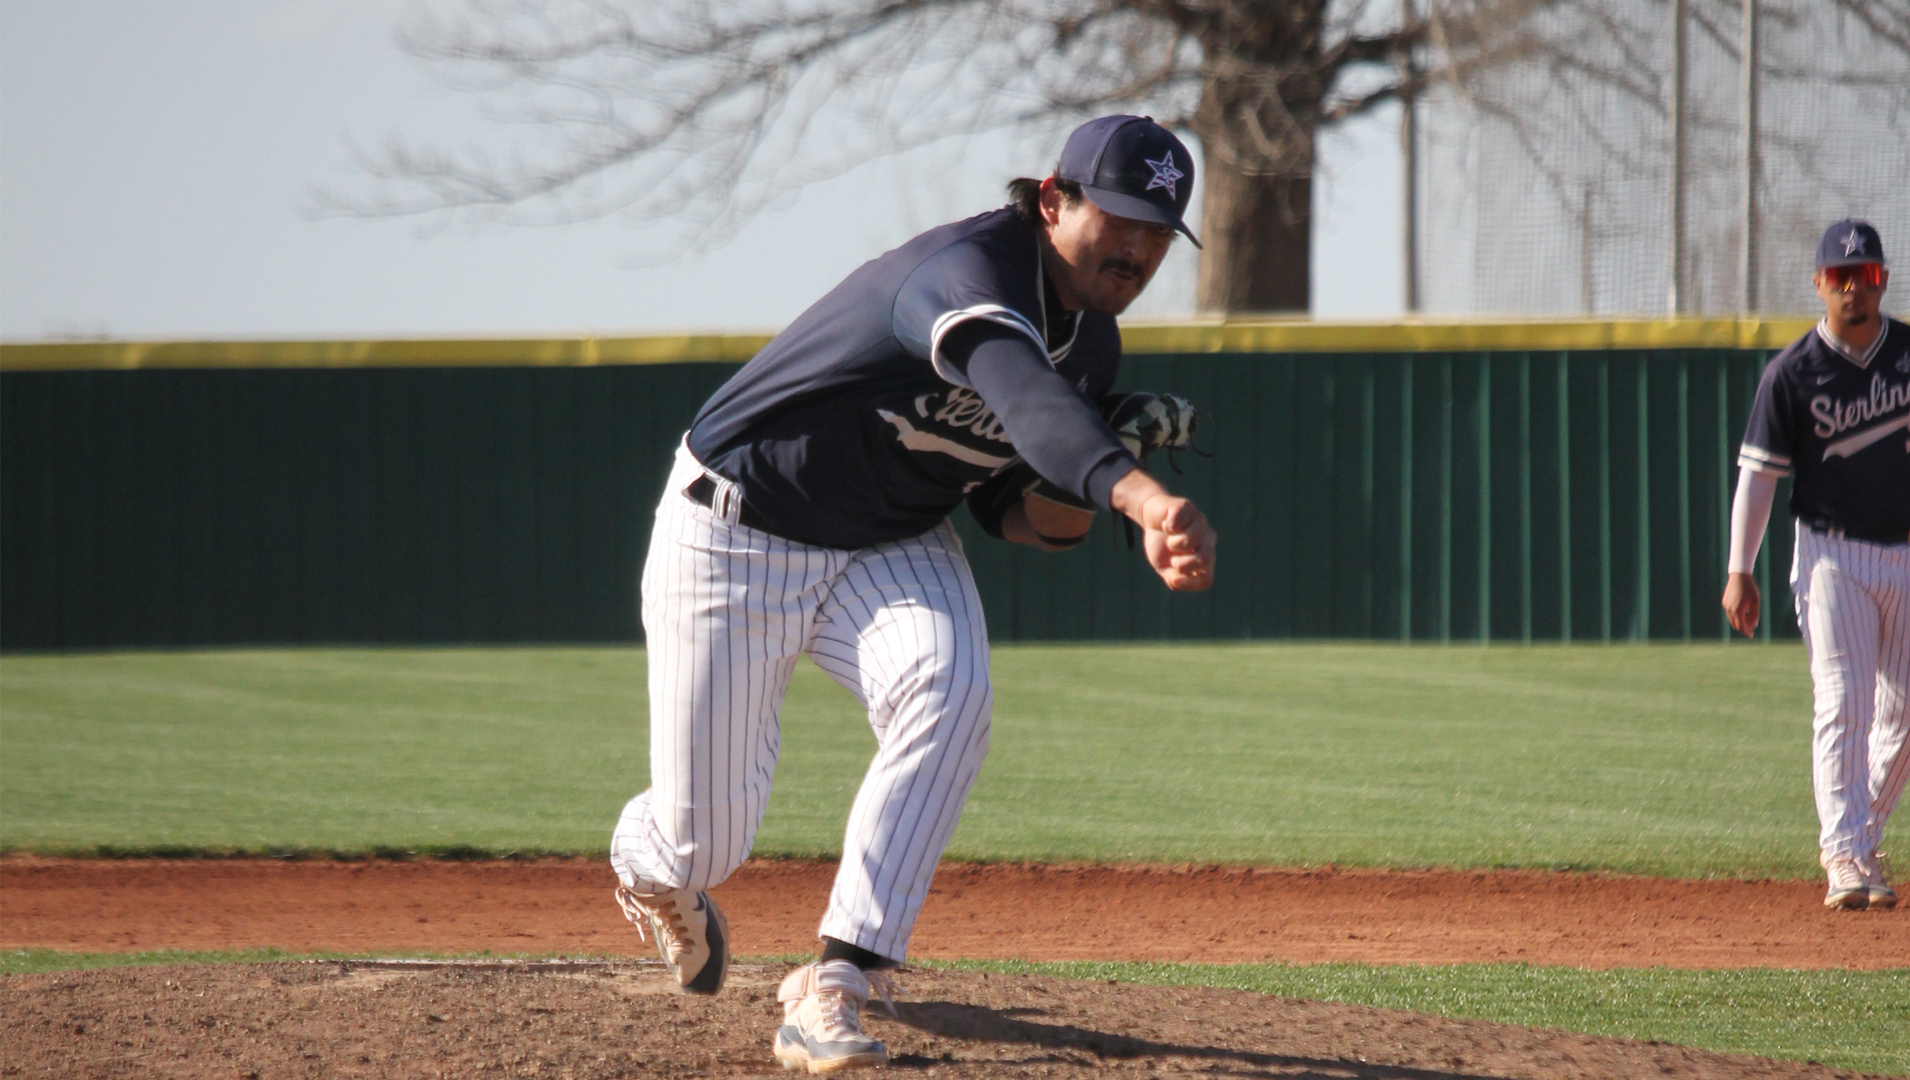 Late Inning Rally Not Enough in Loss to KWU